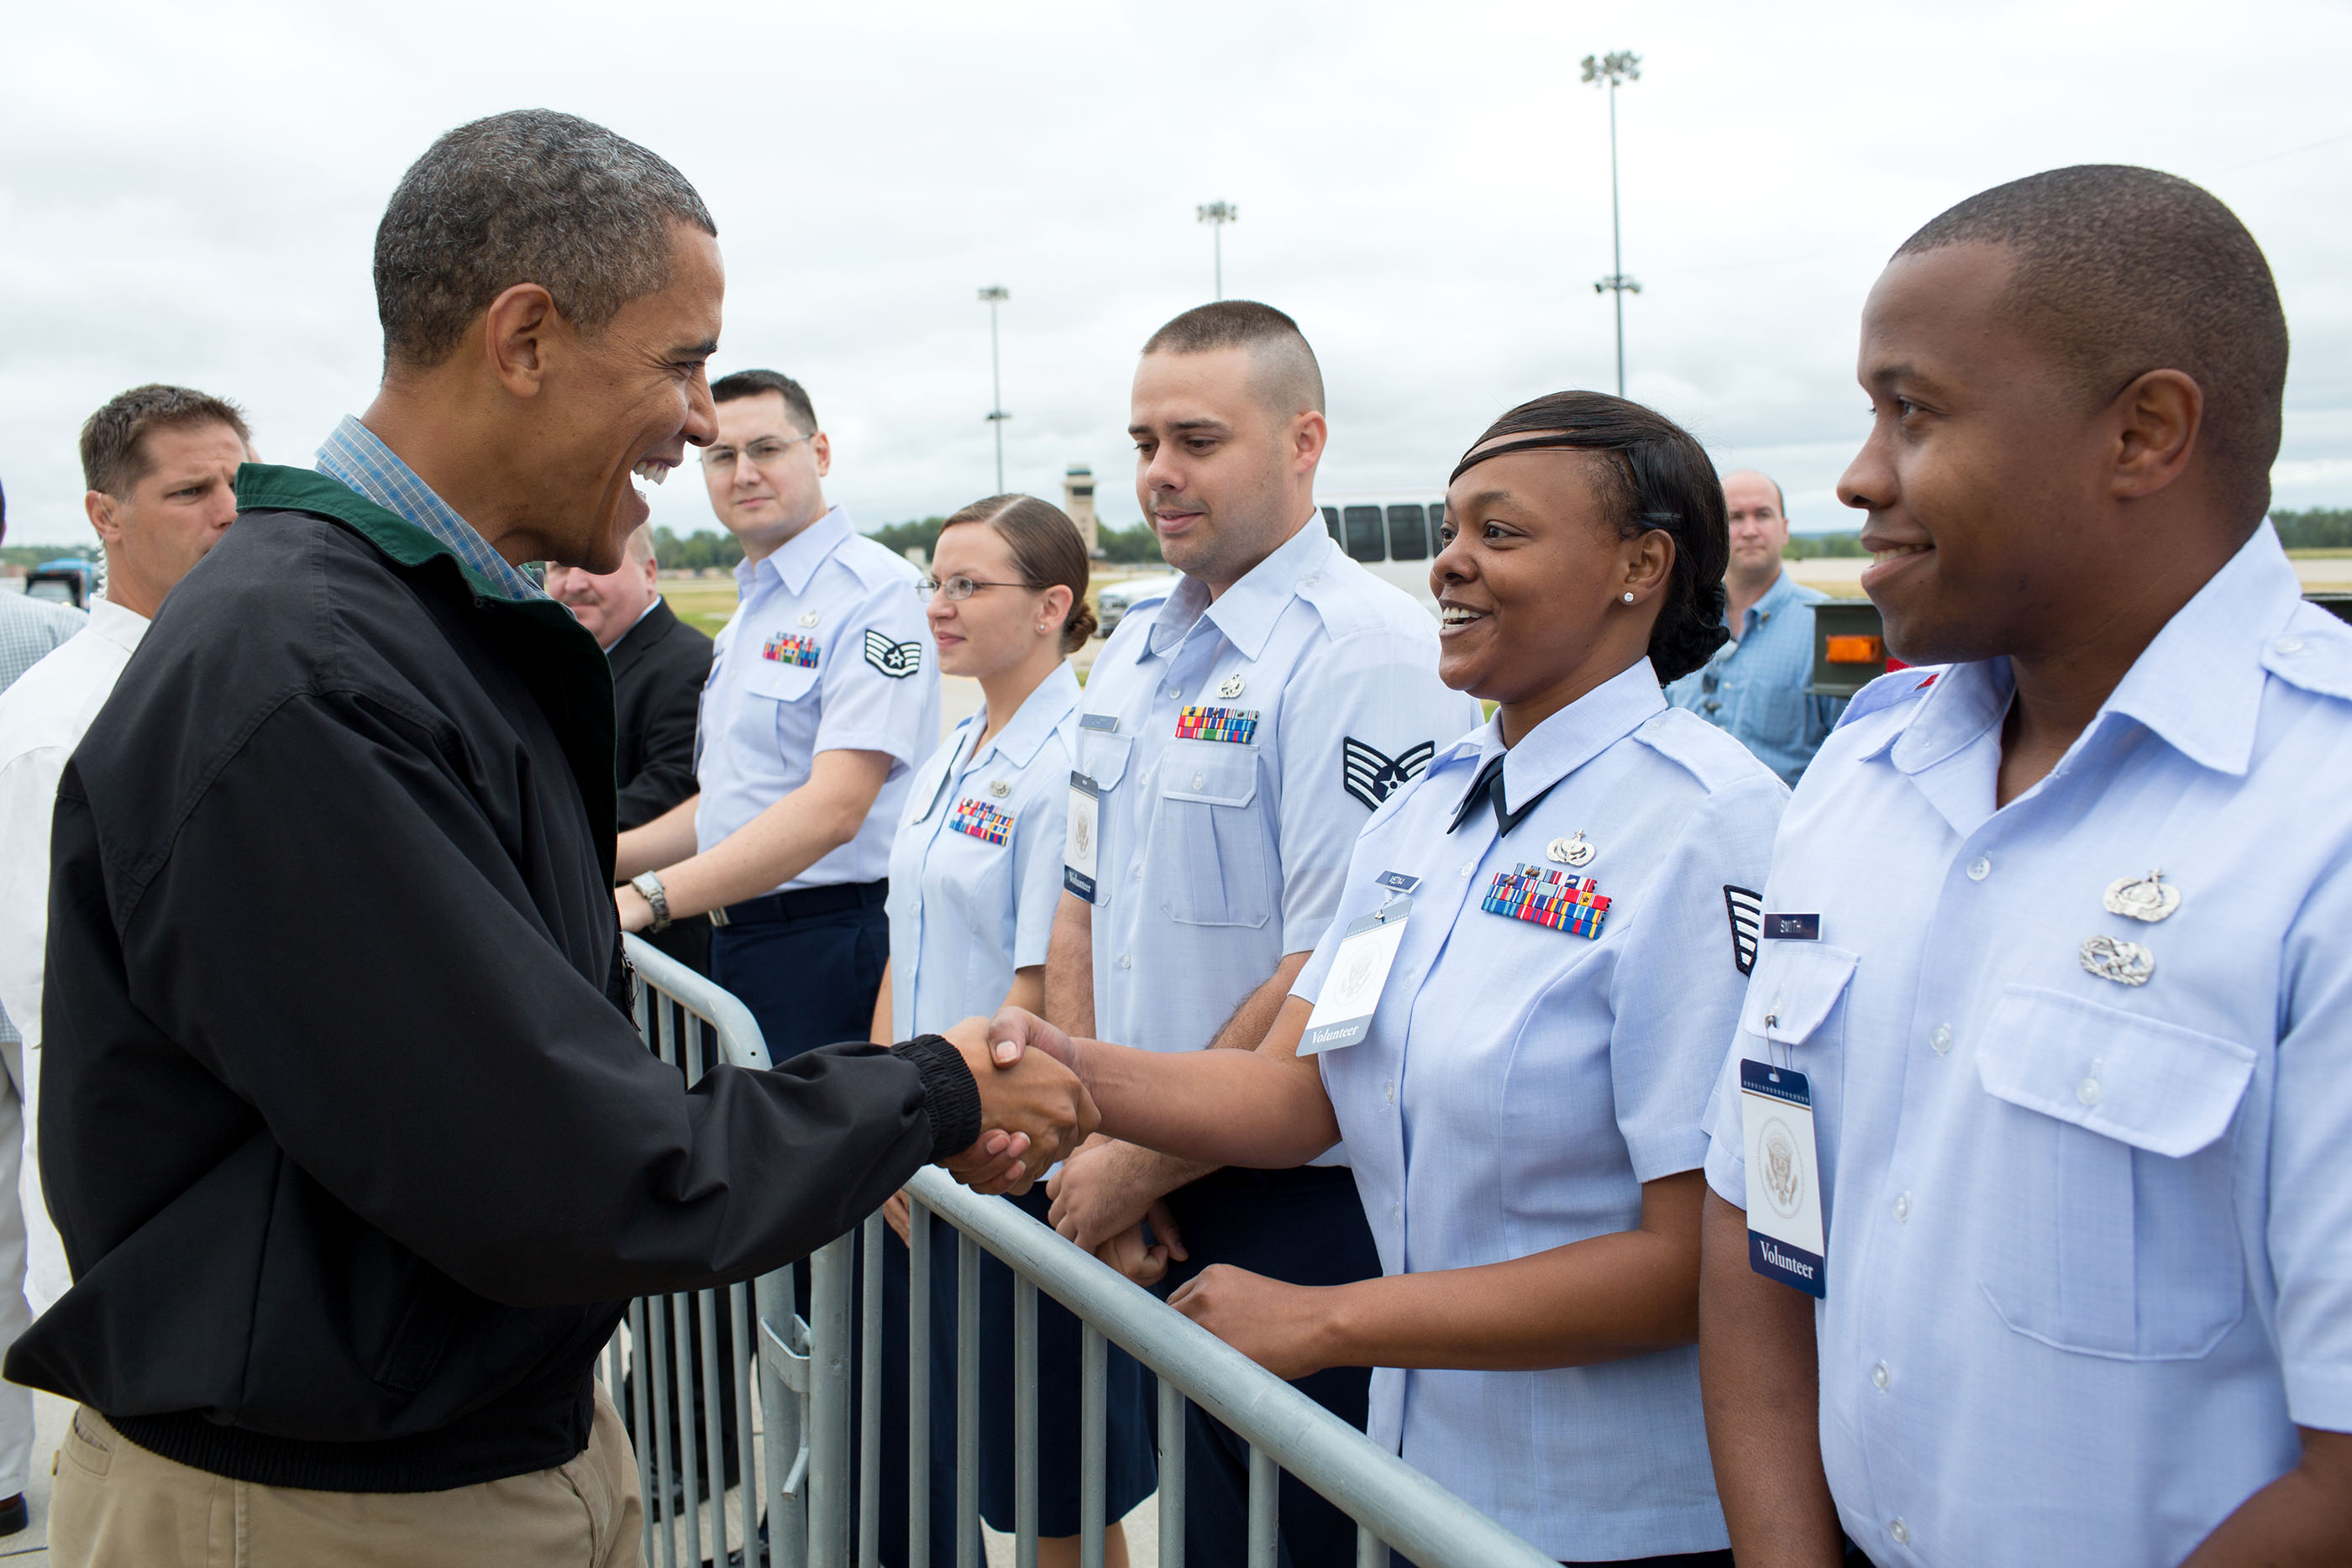 Nebraska, Aug. 13, 2012. Greeting military personnel at Offutt Air Force Base. (Official White House Photo by Pete Souza)